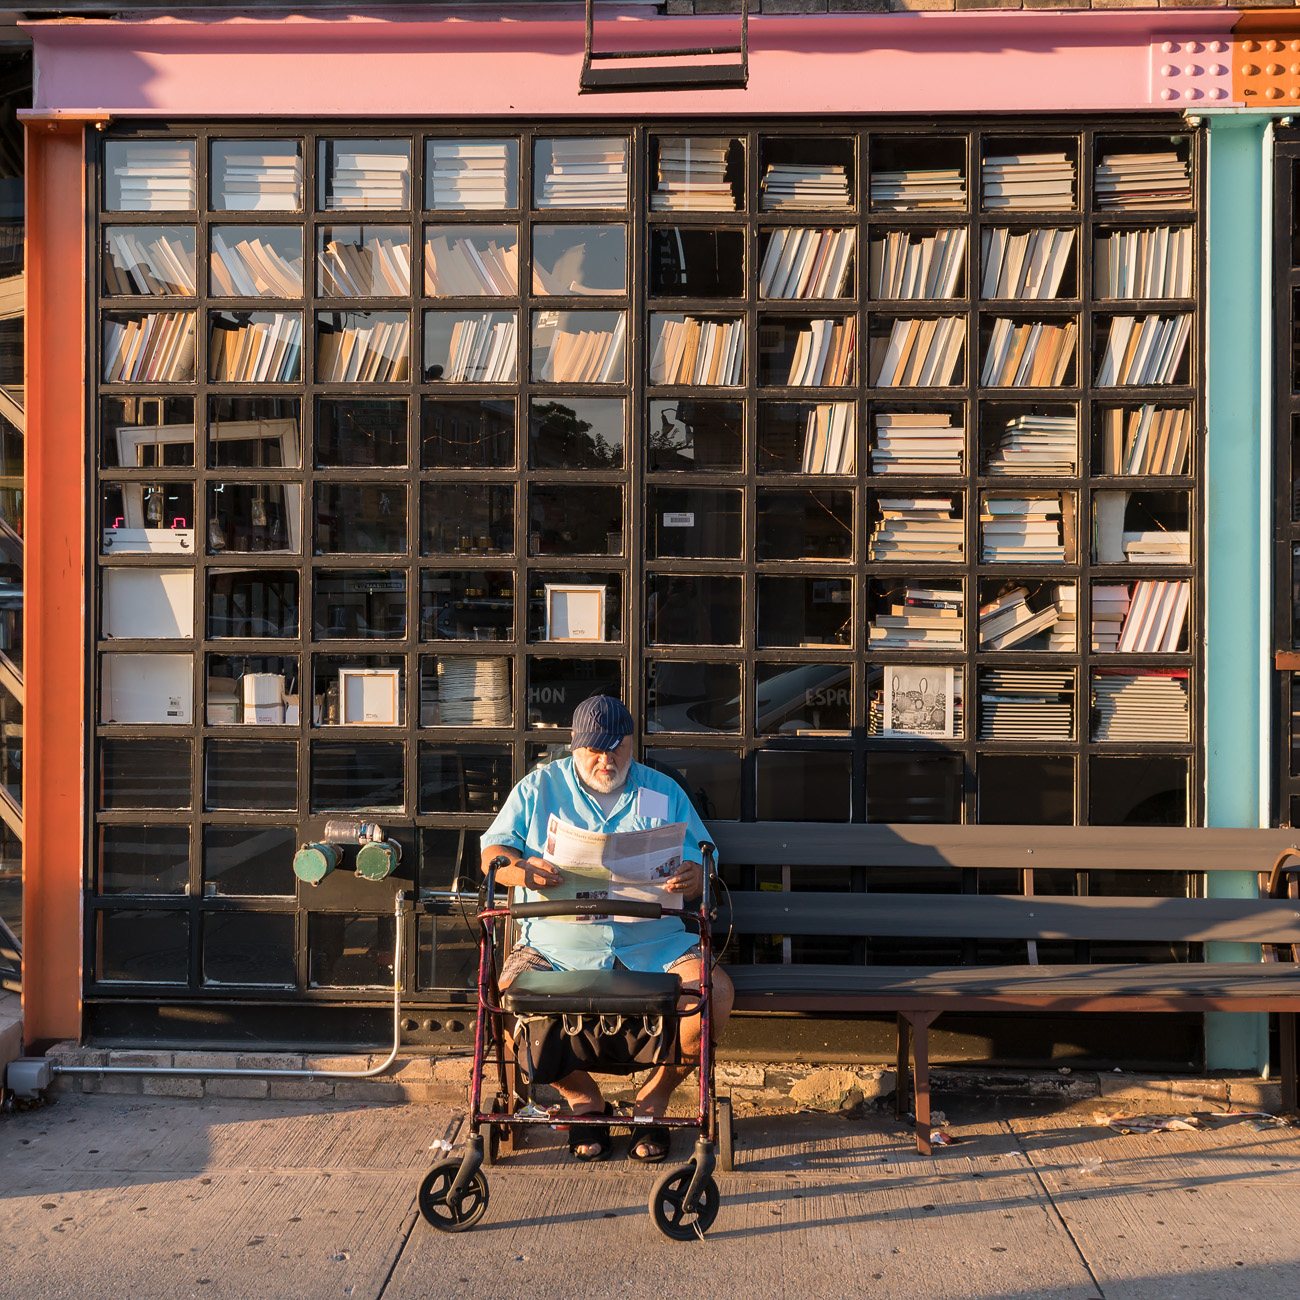 Photo: man reading on a bench in Brooklyn.